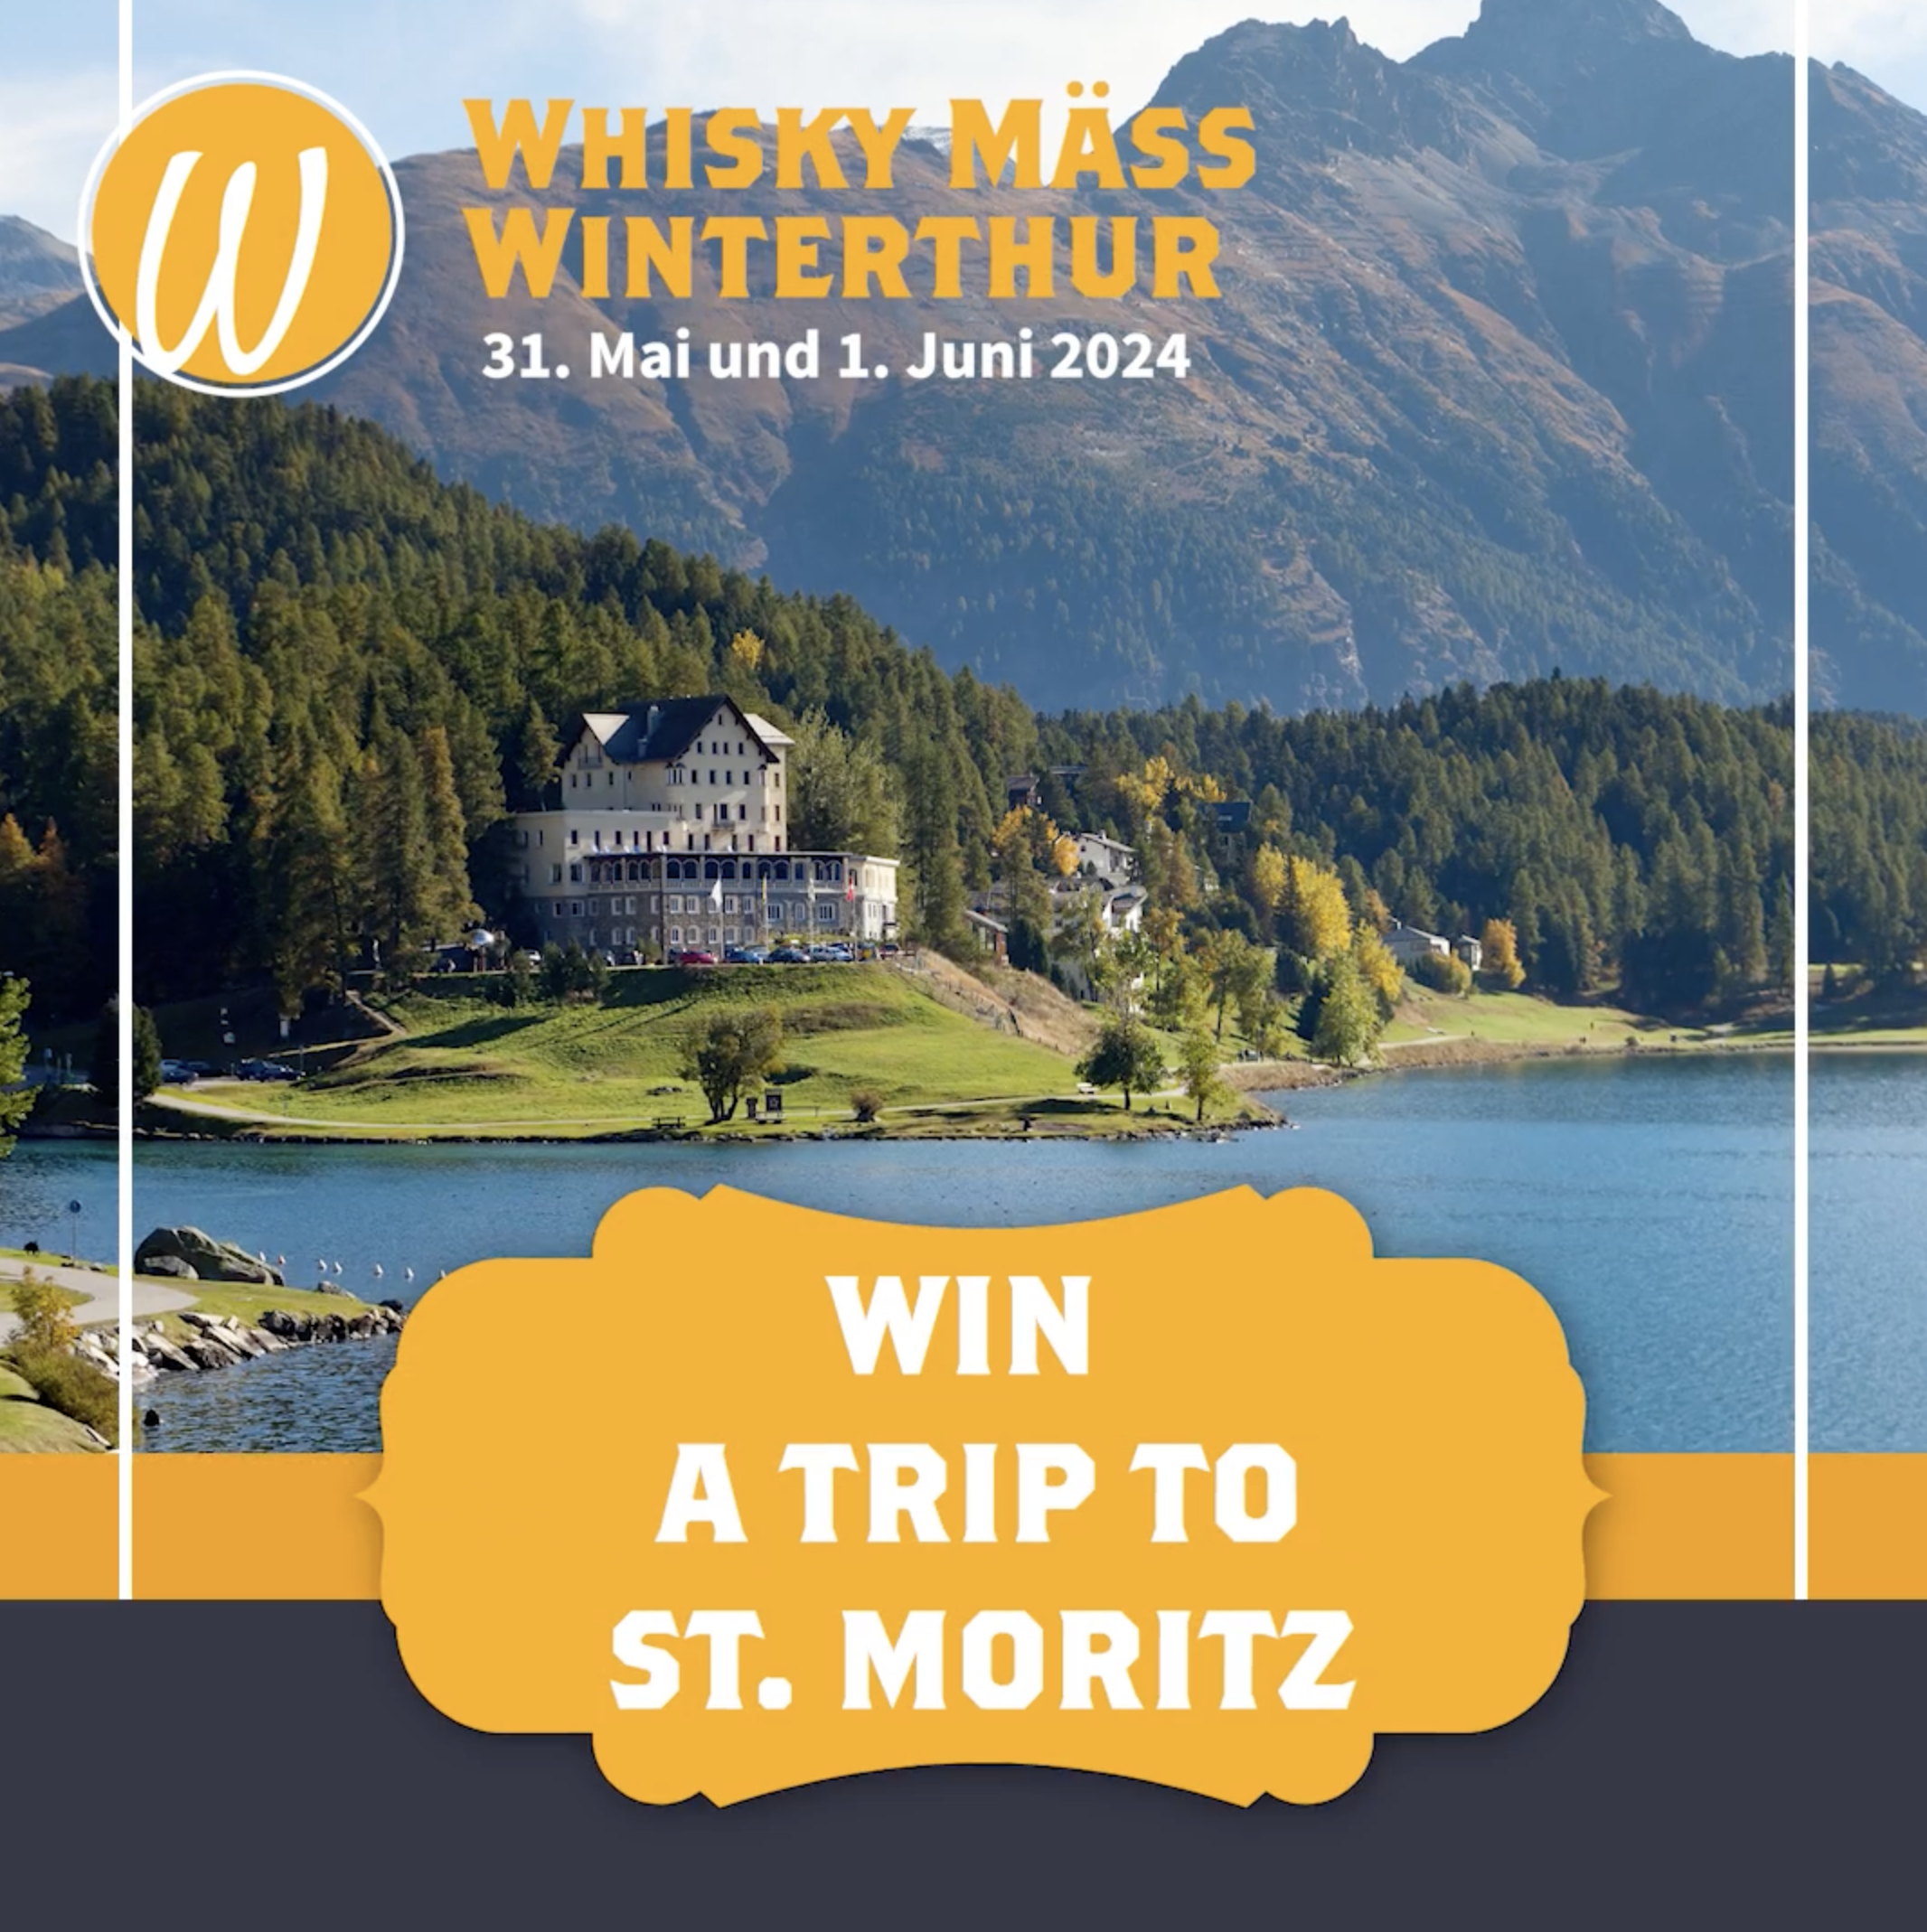 whisky-maess-challenge-win-a-trip-to-st-moritz.png